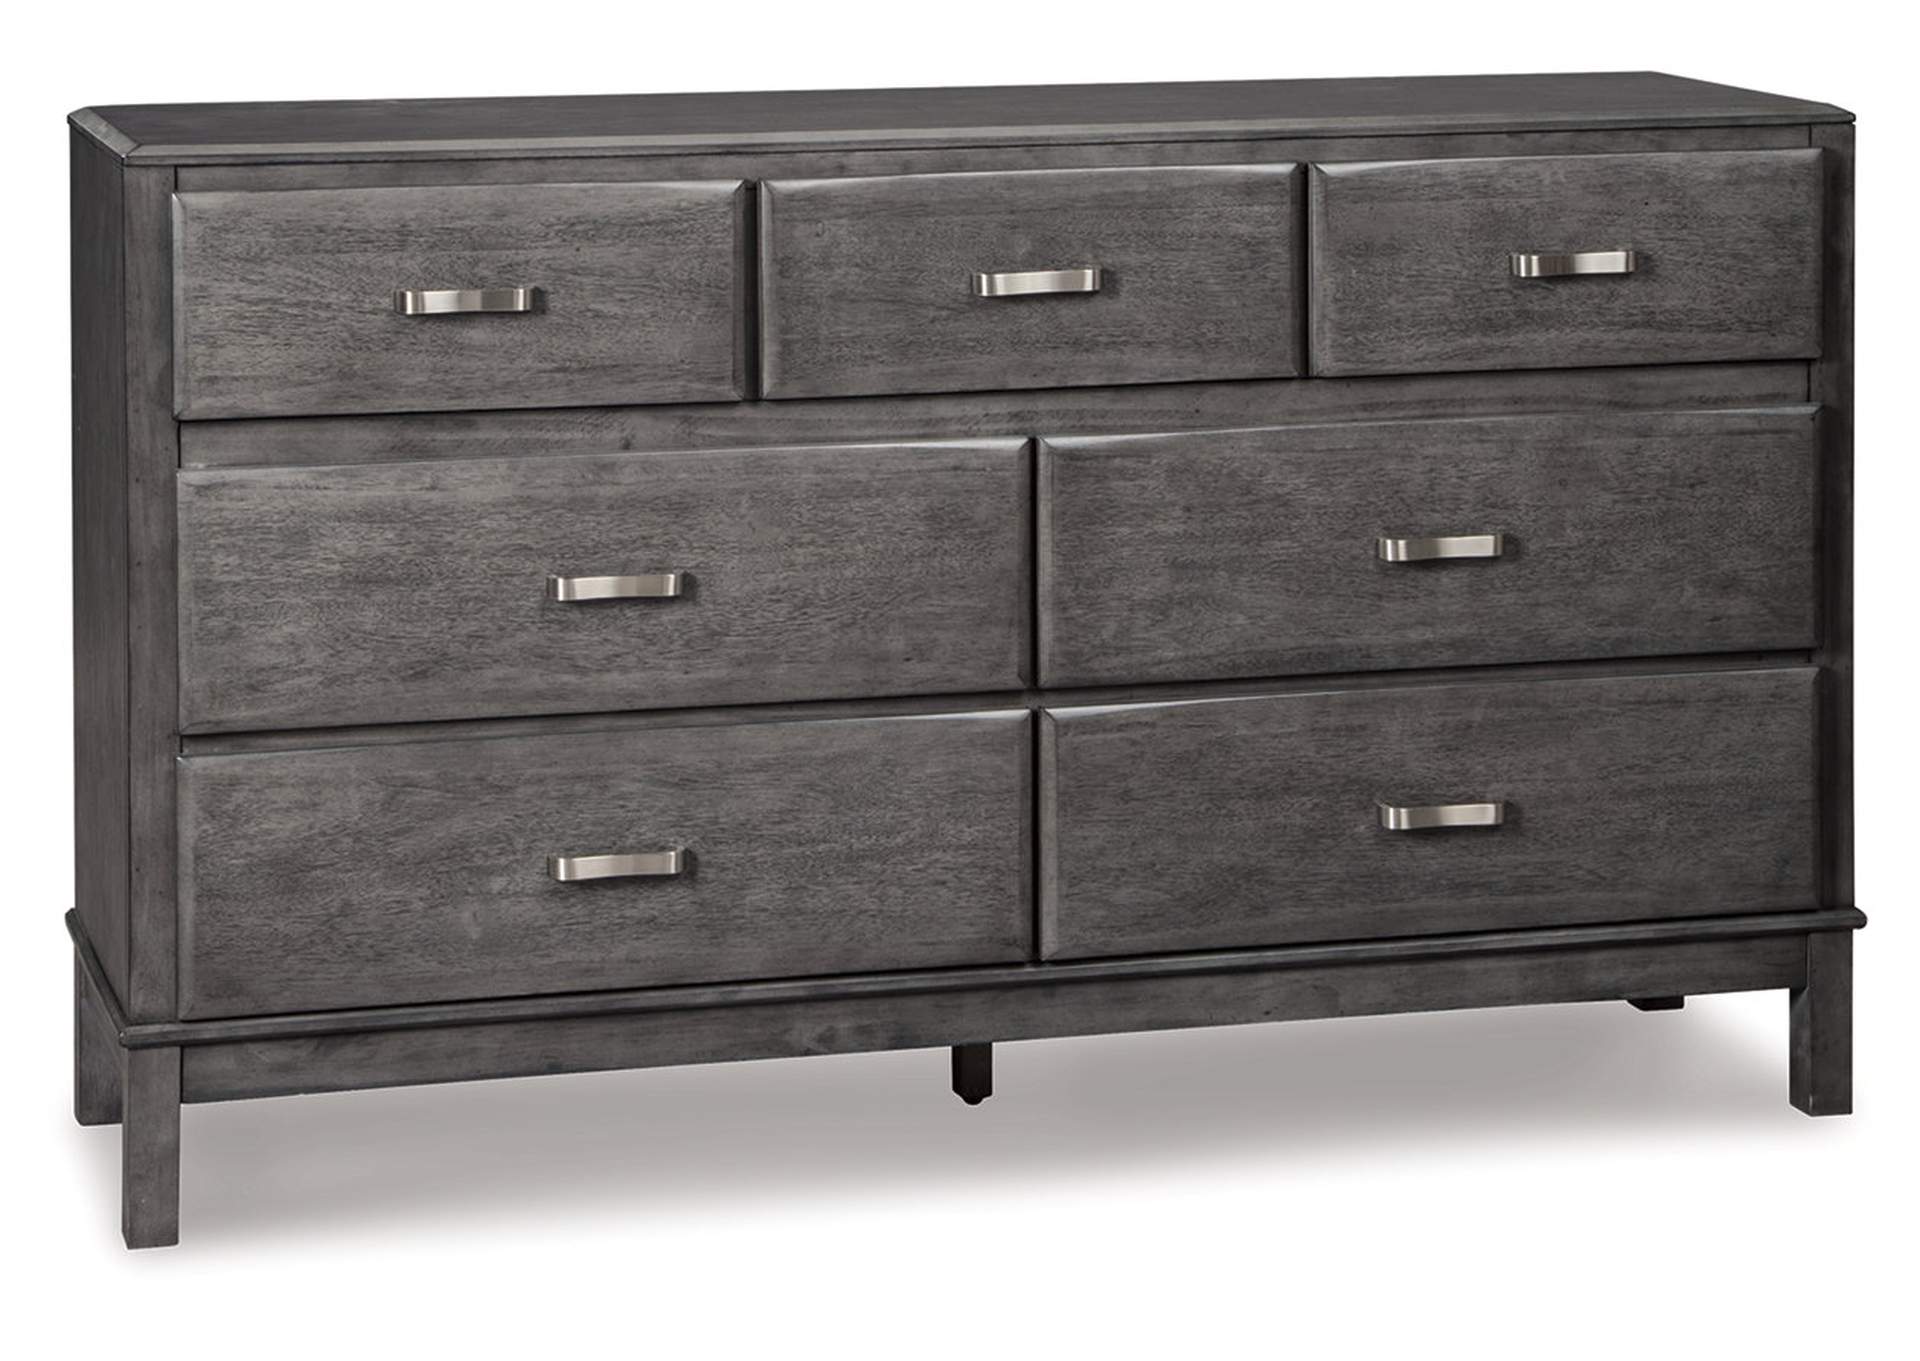 The Caitbrook Gray King Storage Bed With 8 Drawers is available at